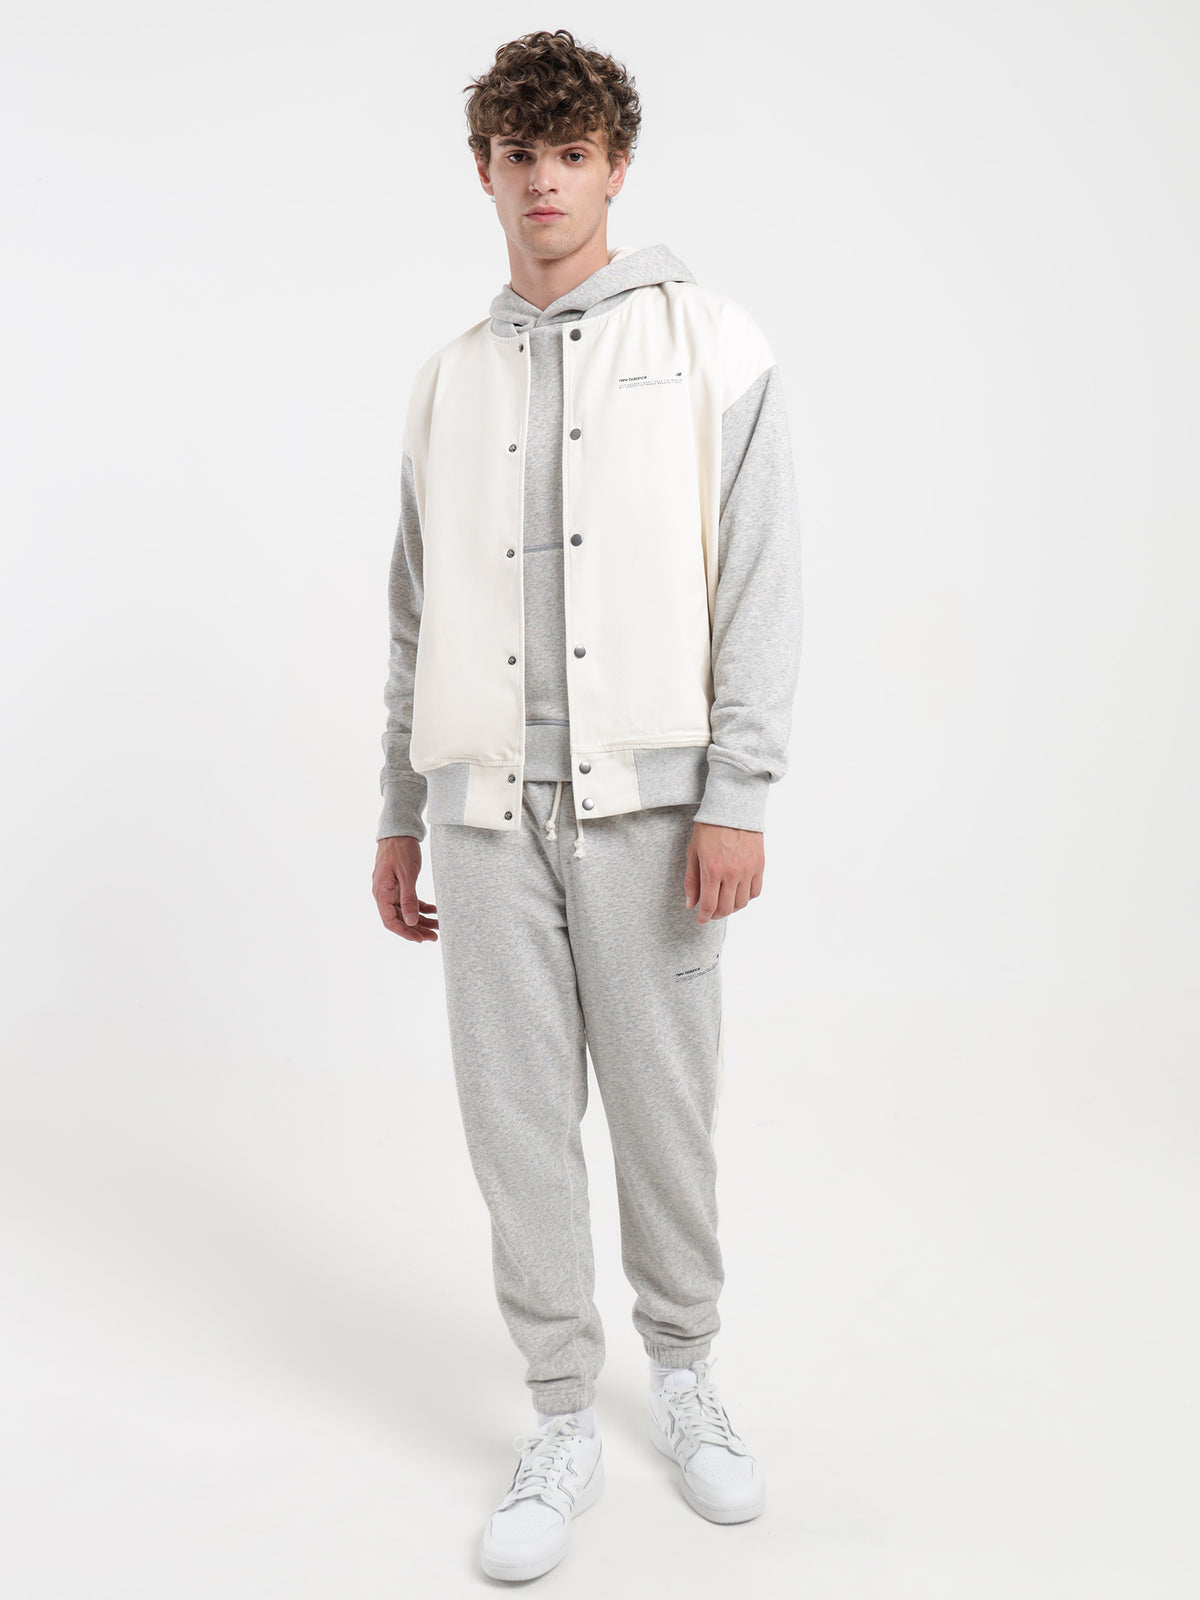 NB Athletics Undyed Trackpants in Grey